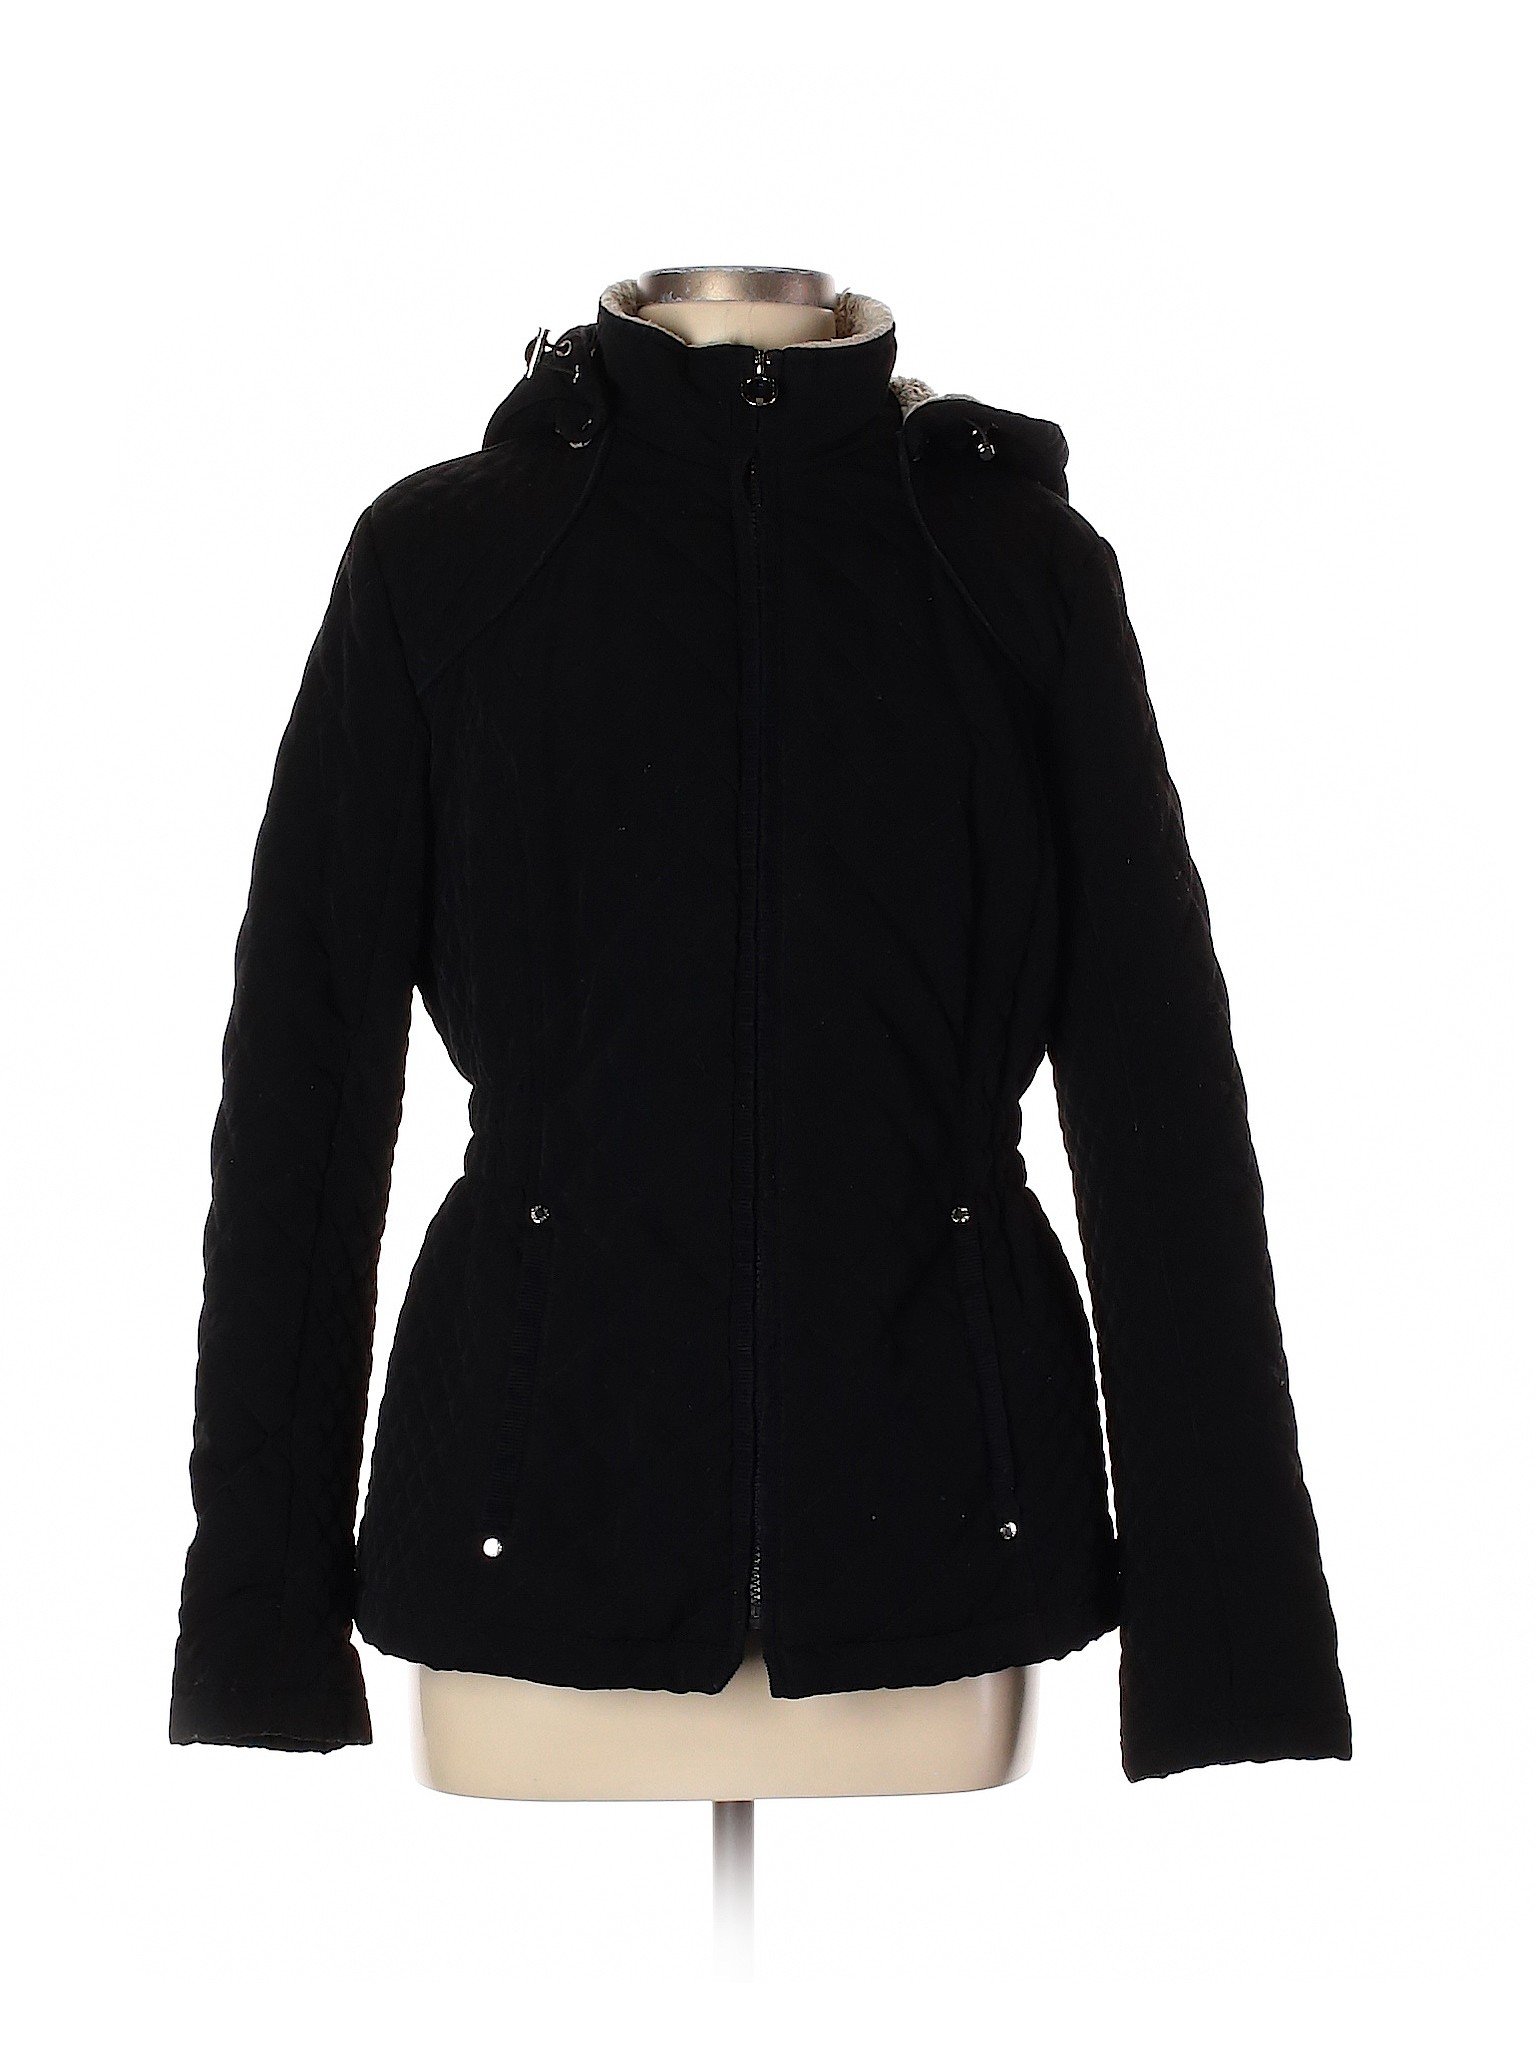 Laundry by Design 100% Polyester Solid Black Coat Size M - 81% off ...